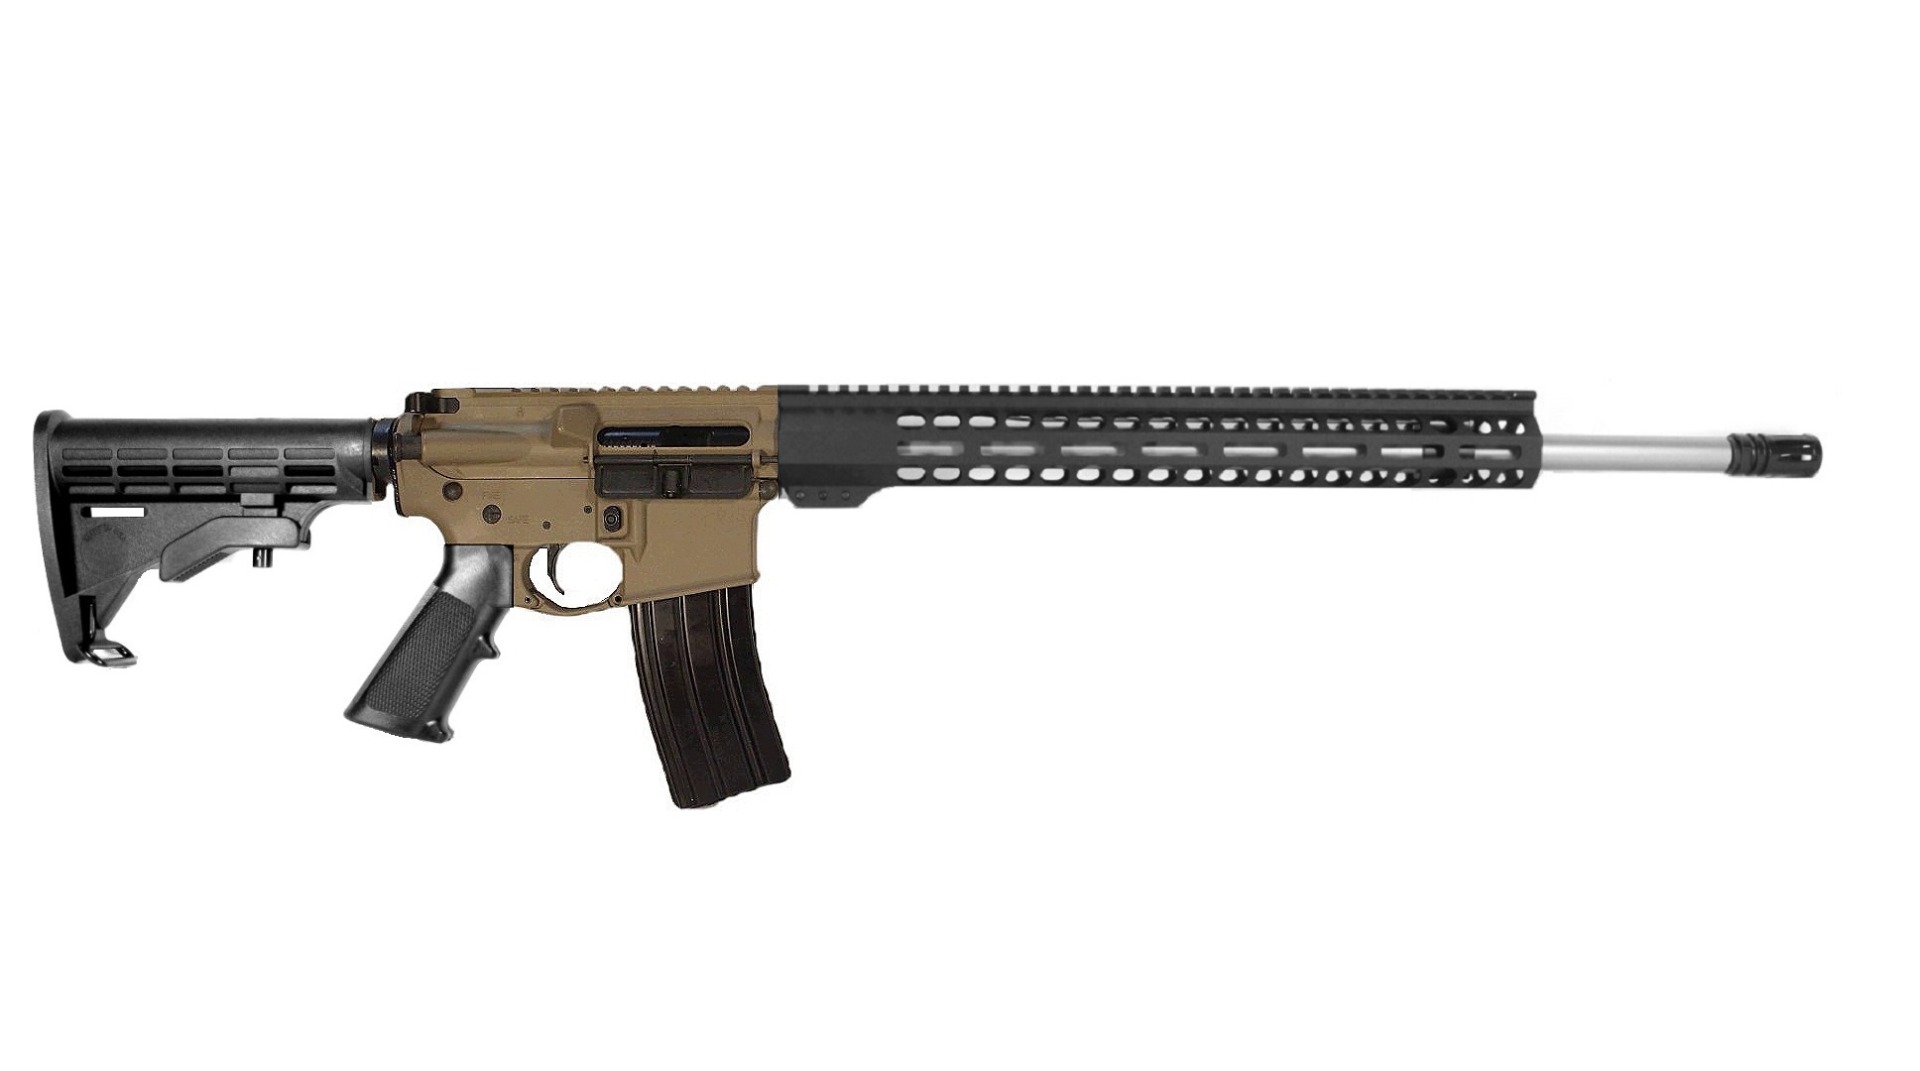 20 inch 223 Wylde Stainless Rifle 2 Tone FDE/BLK